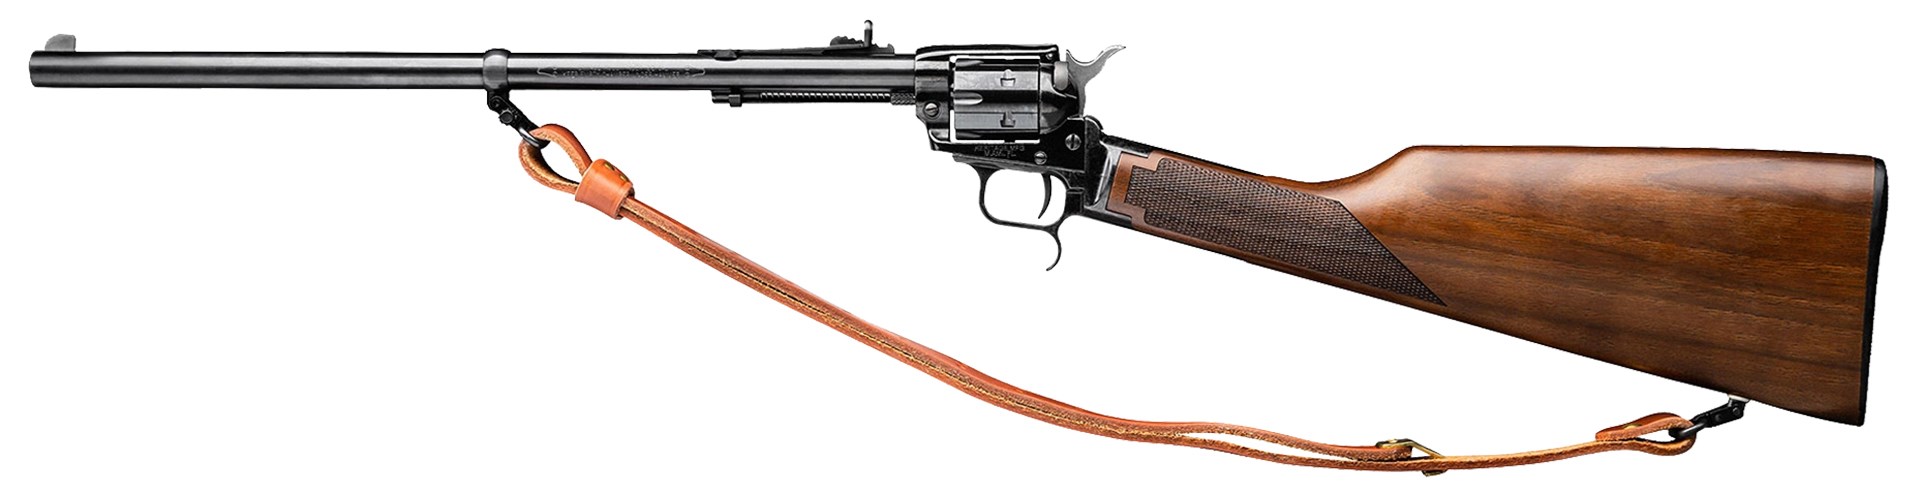 Heritage Manufacturing Rough Rider Rancher Carbine left-side view on white black metal wood stock leather sling